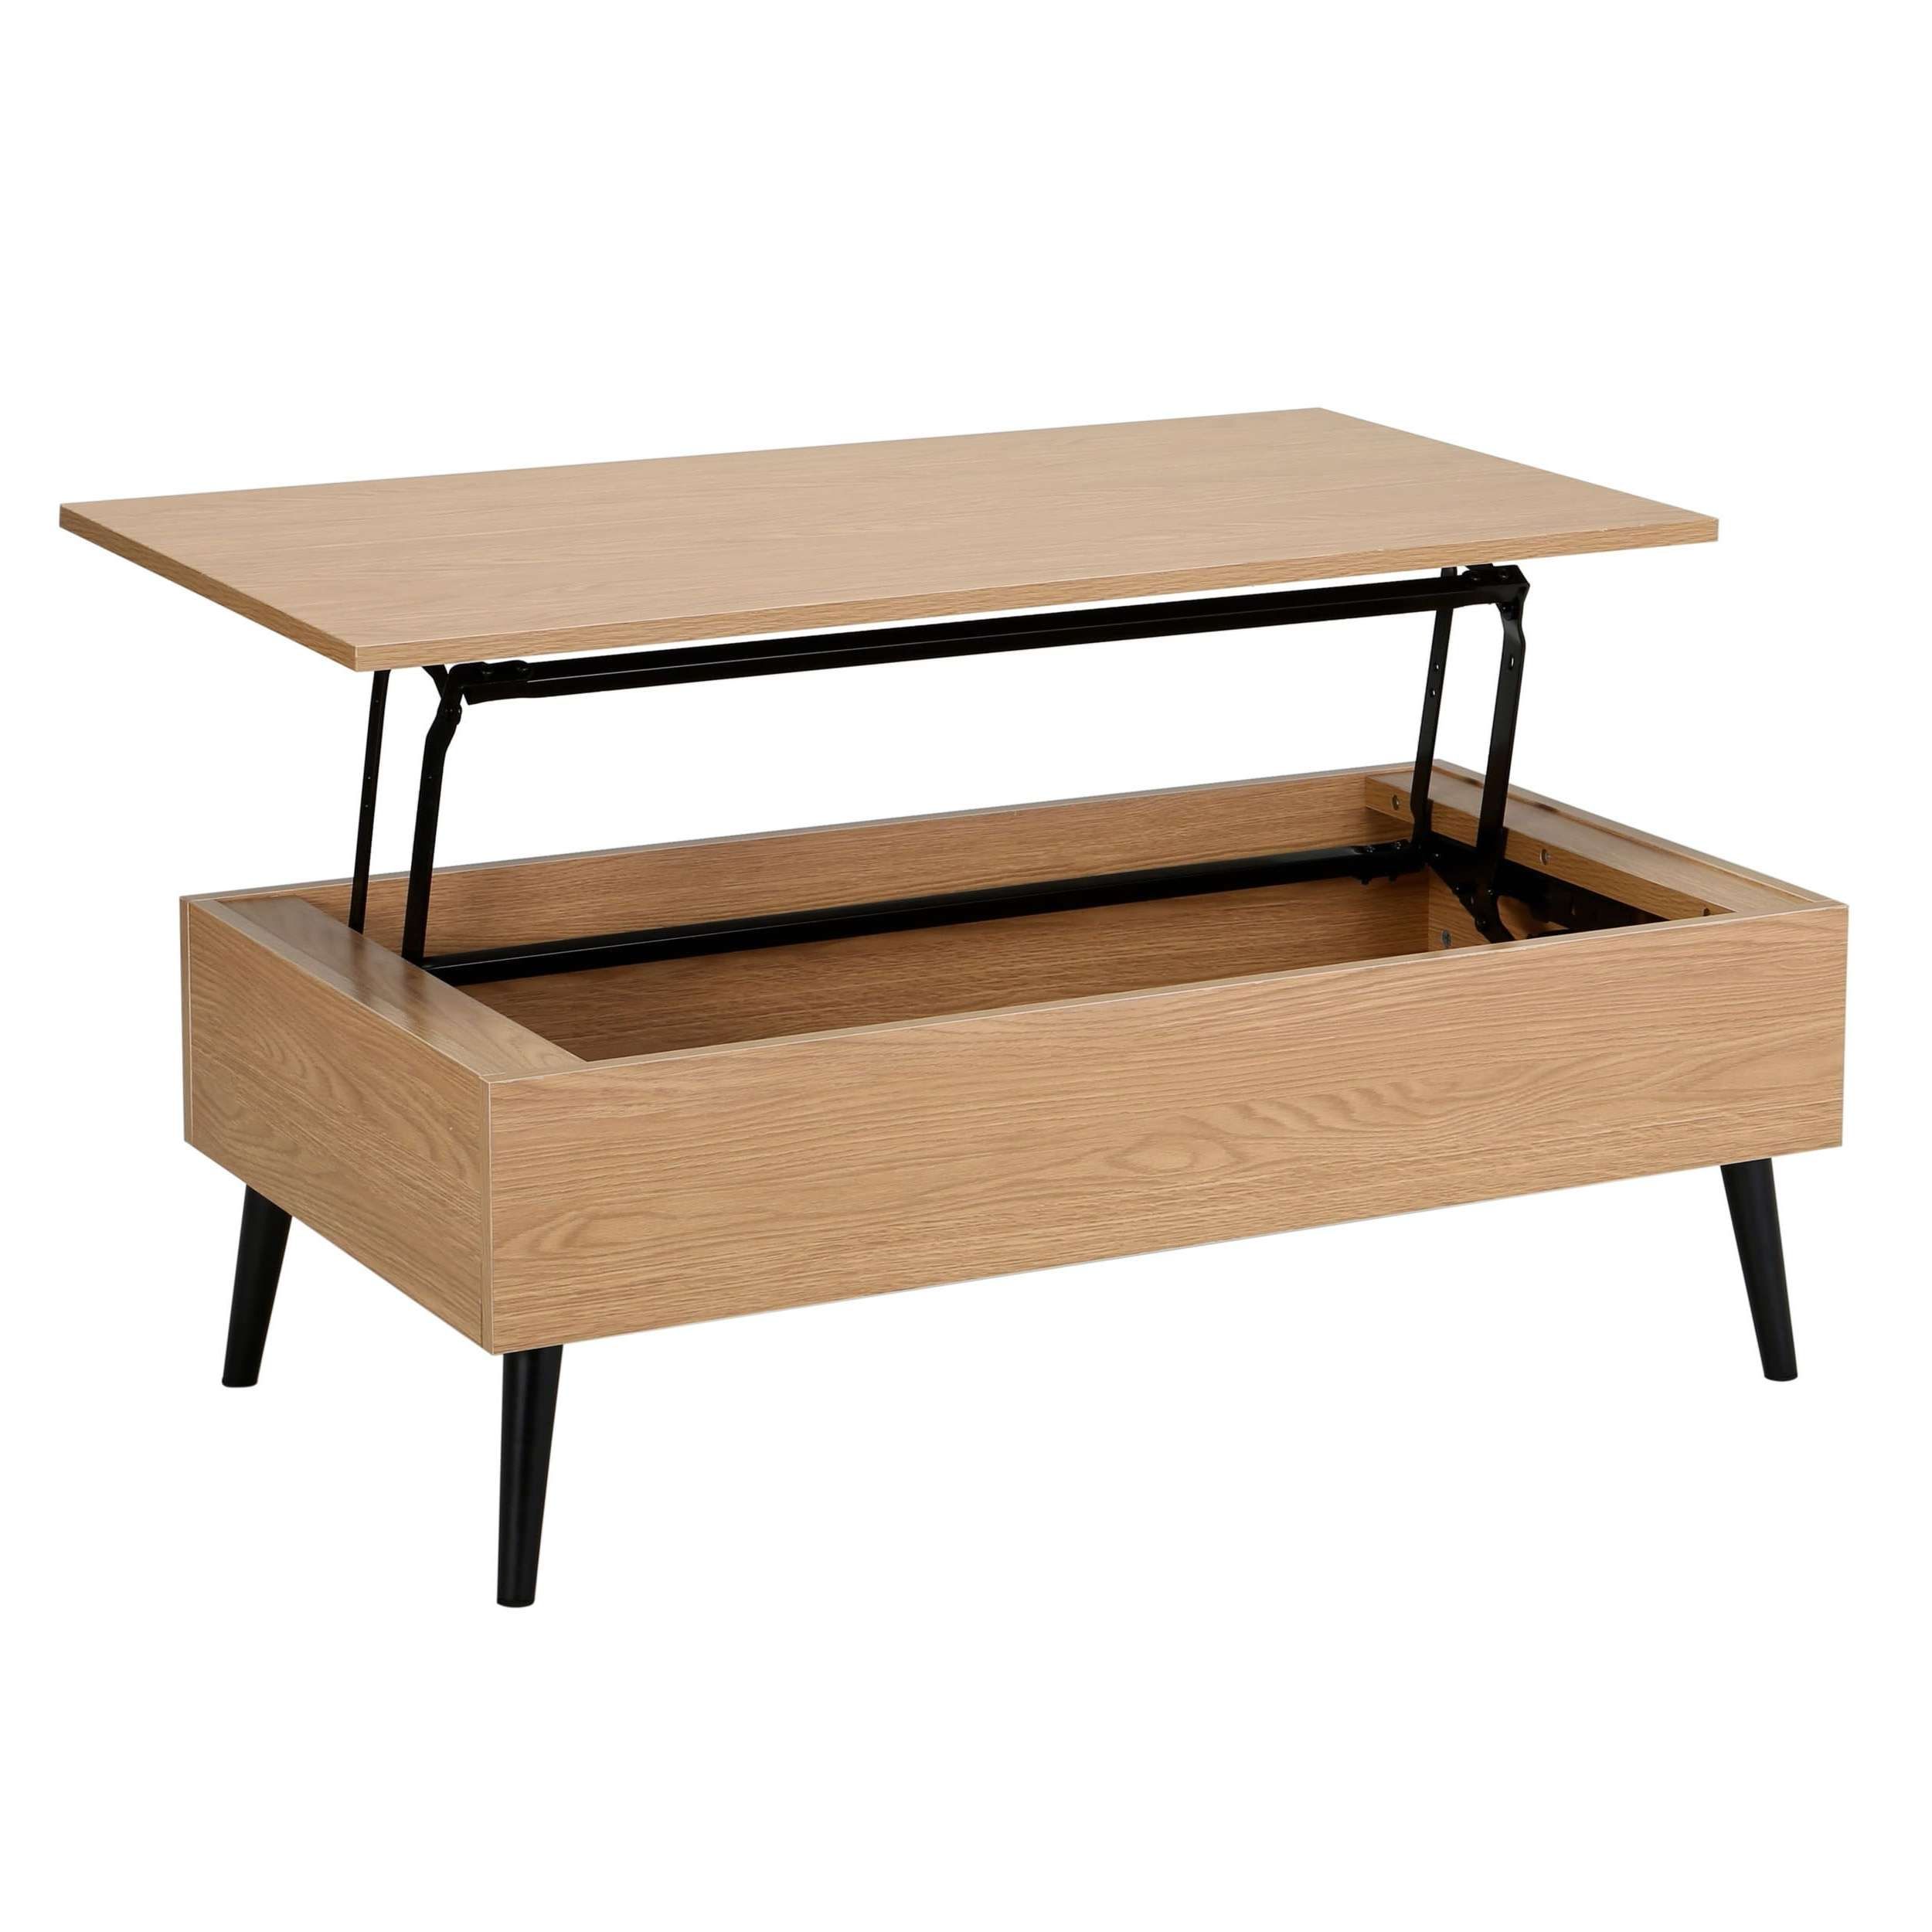 Well Known Storage Coffee Tables Regarding Elliot Wood Lift Top Storage Coffee Tablechristopher Knight (View 17 of 20)